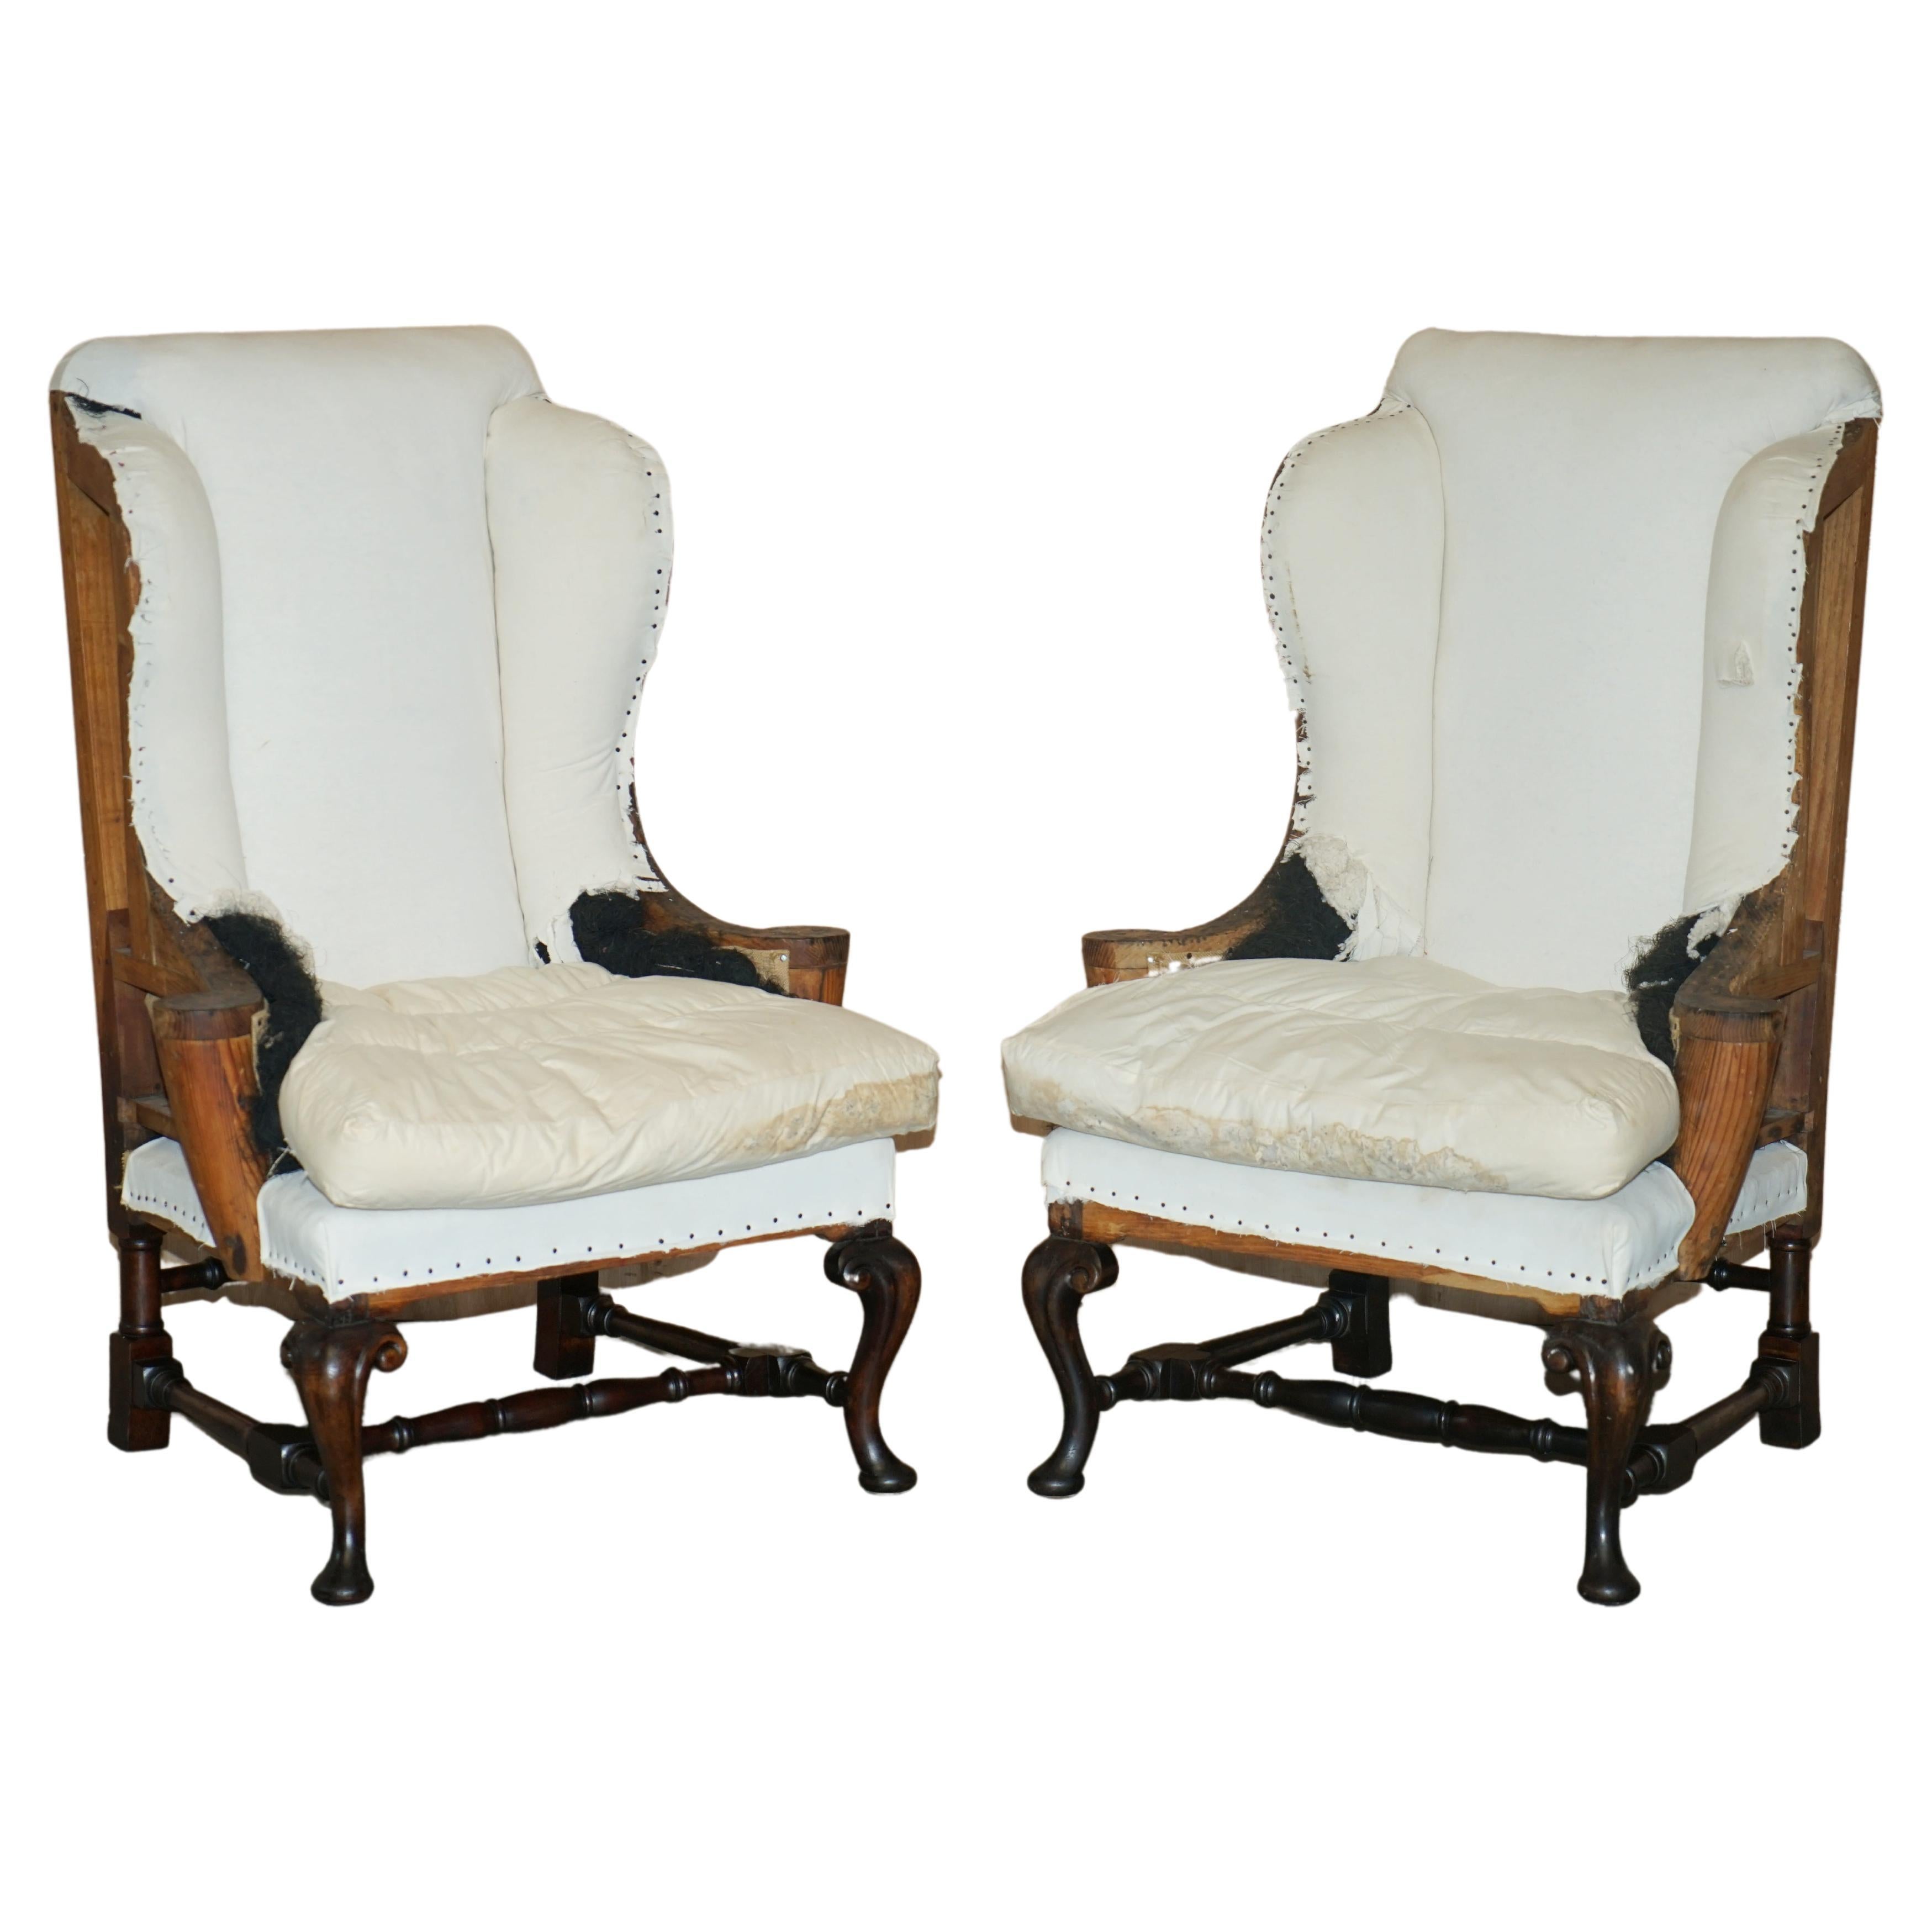 Pair of Antique Georgian Deconstructed Wingback Armchairs William Morris Arms